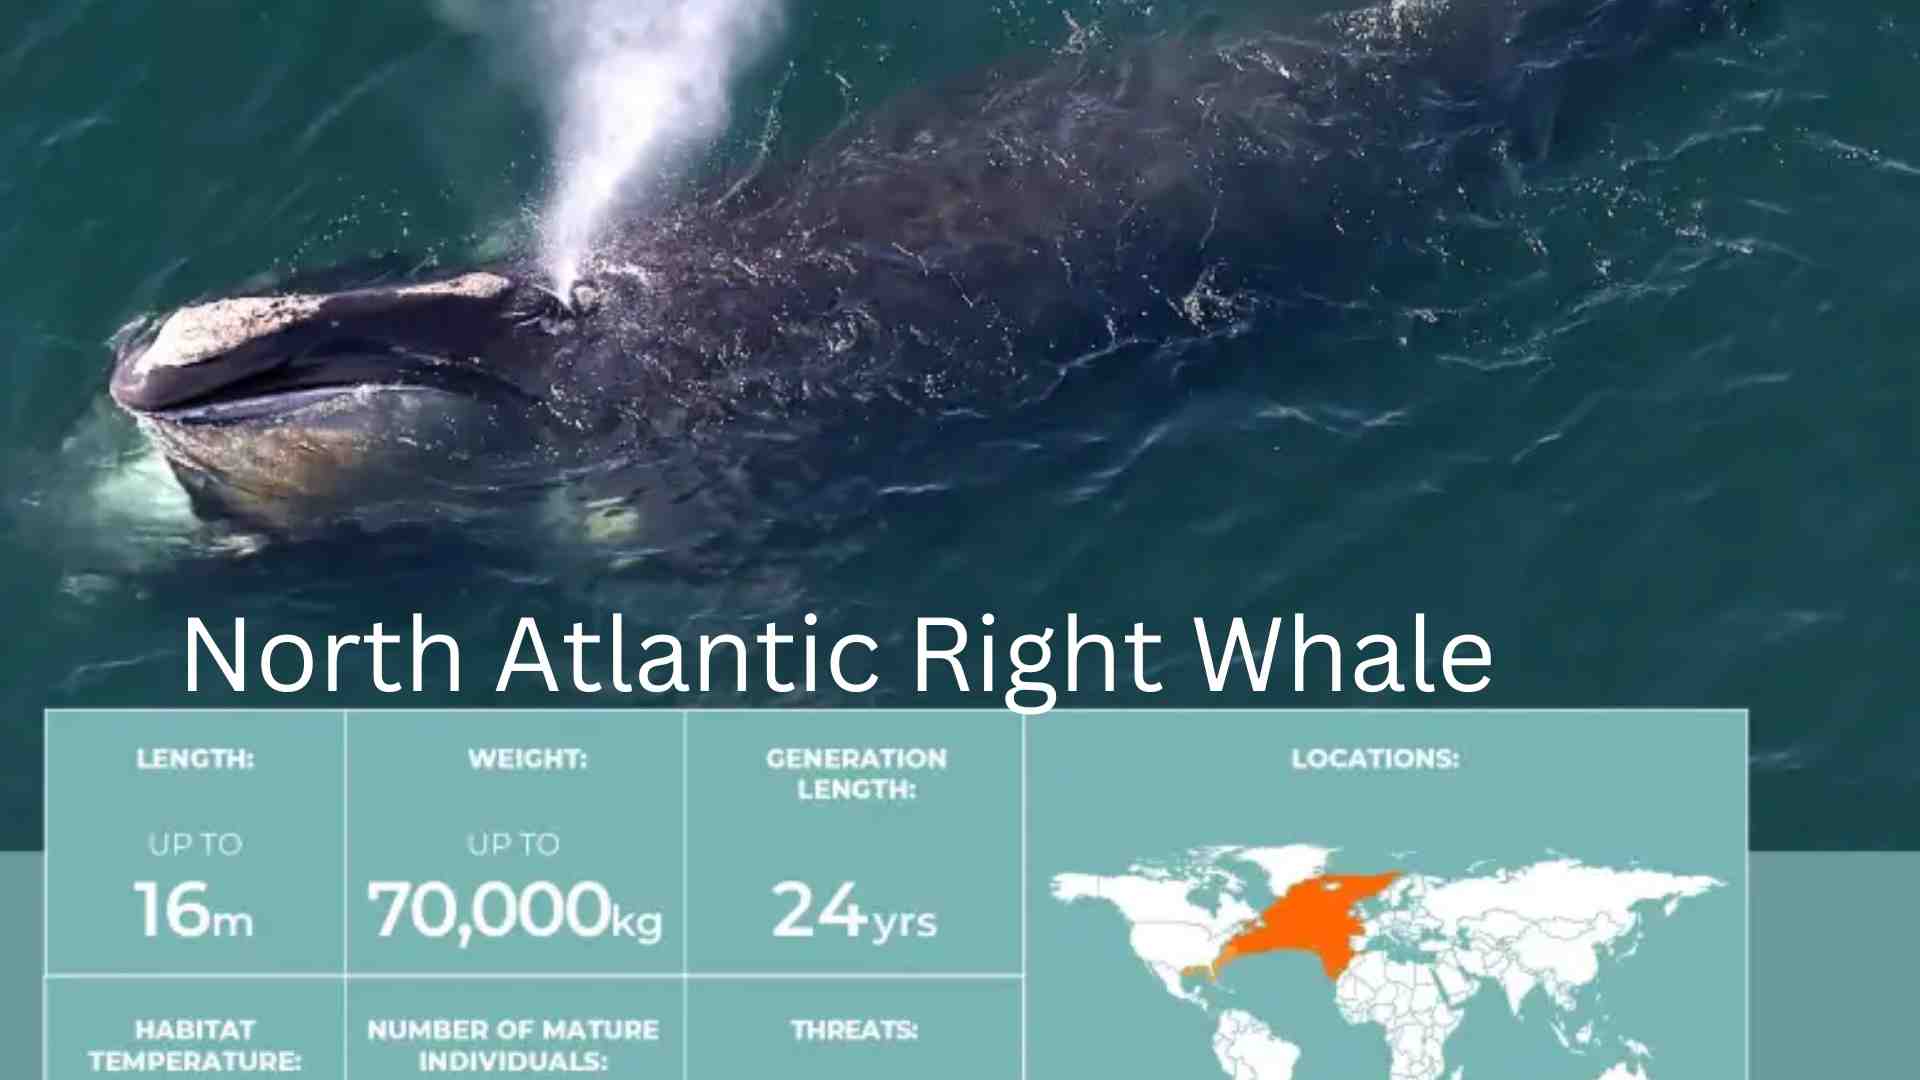 Whales in immediate need protection - Platform Tamil